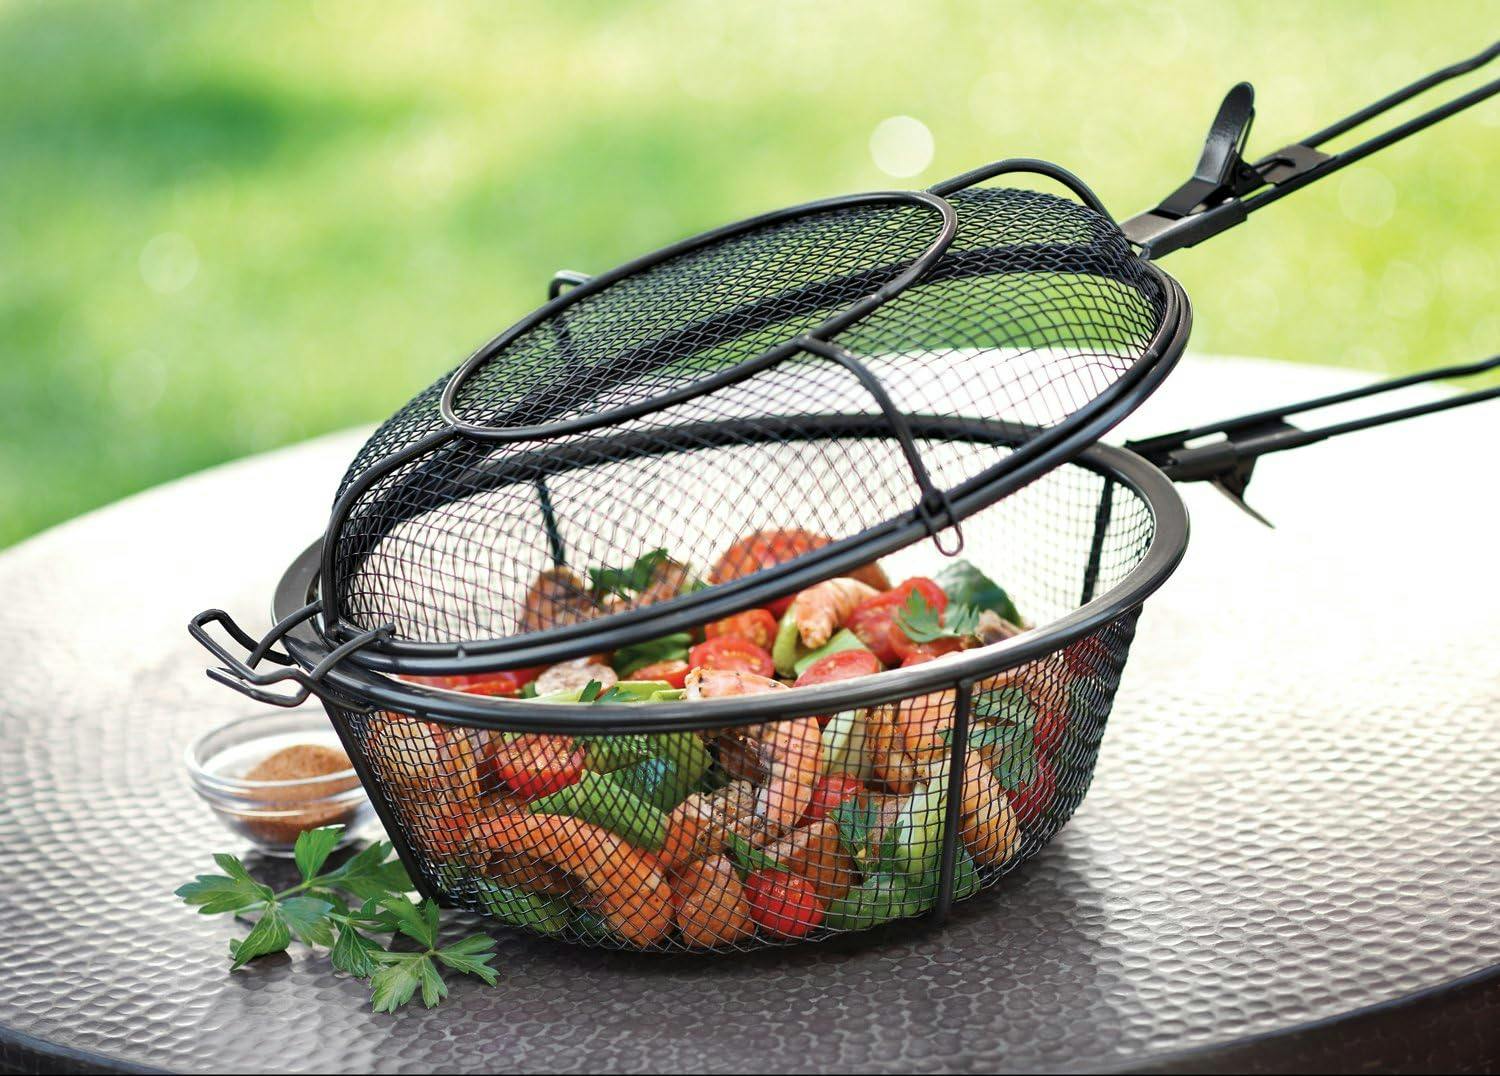 Jumbo Chef's Choice 3-in-1 Outdoor Grill Basket - Black Steel